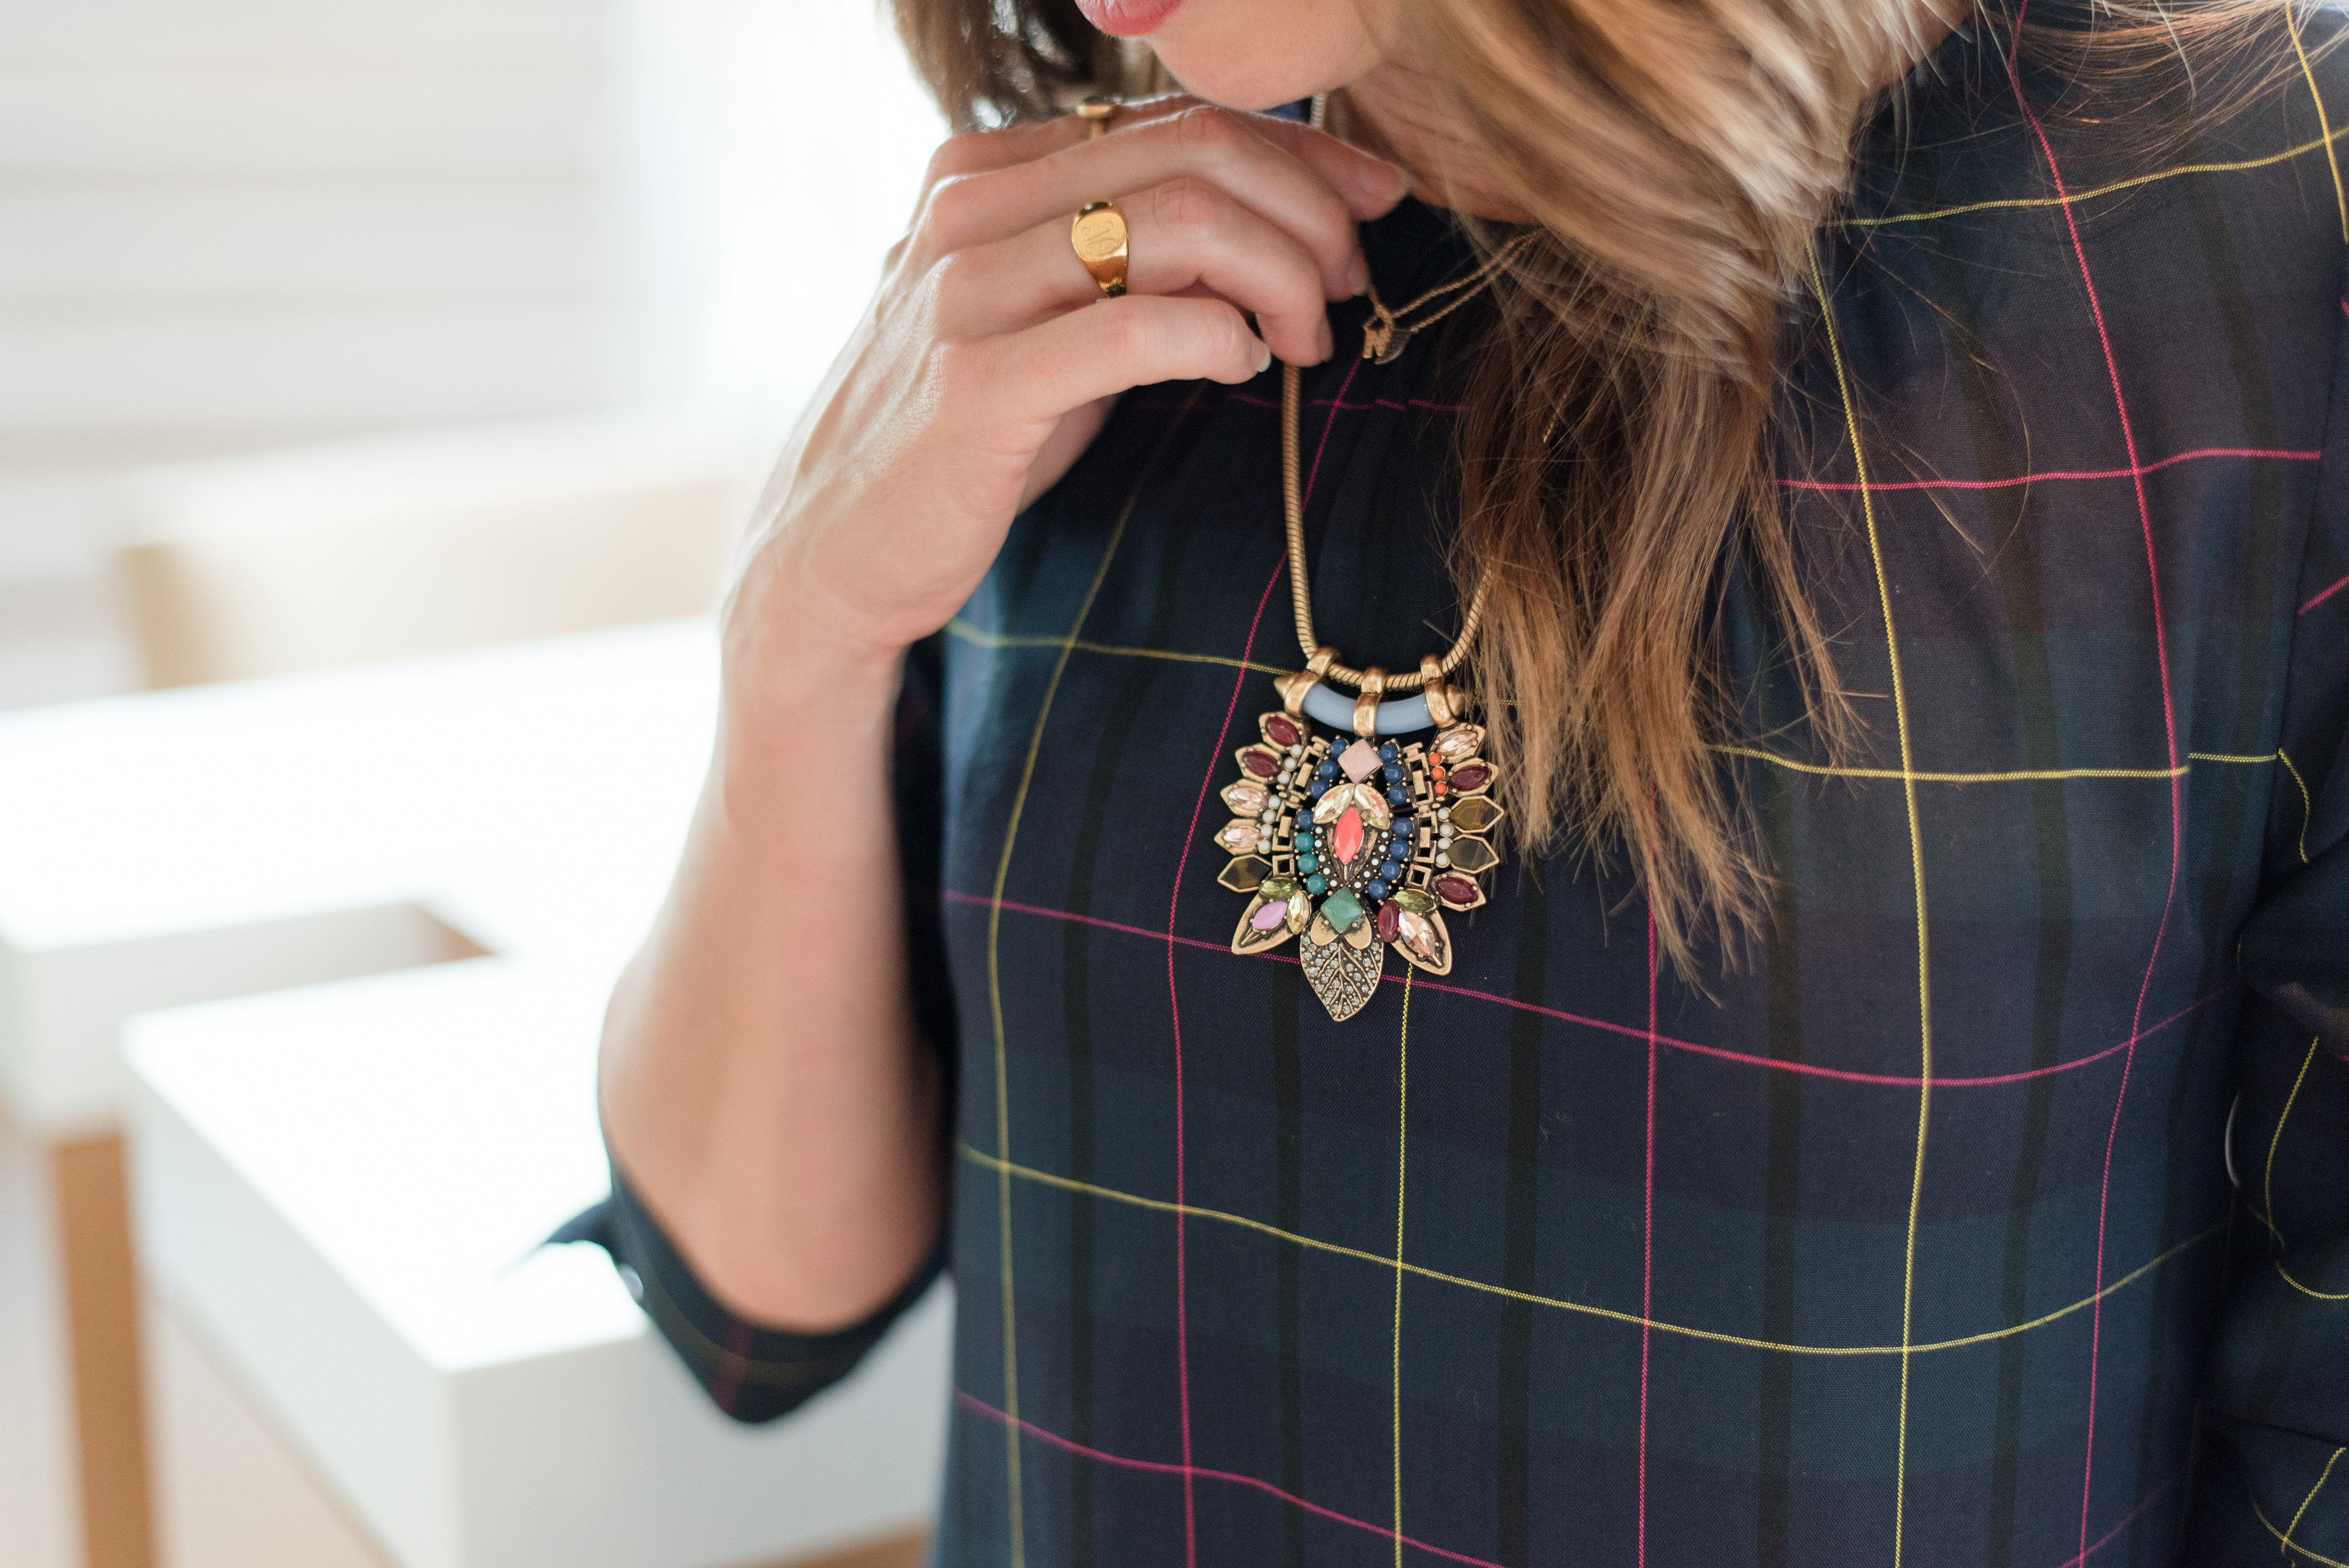 green, navy, plaid, dress, fall fashion, everyday style, statement necklace, accessorize, colorful, gold, finish the look